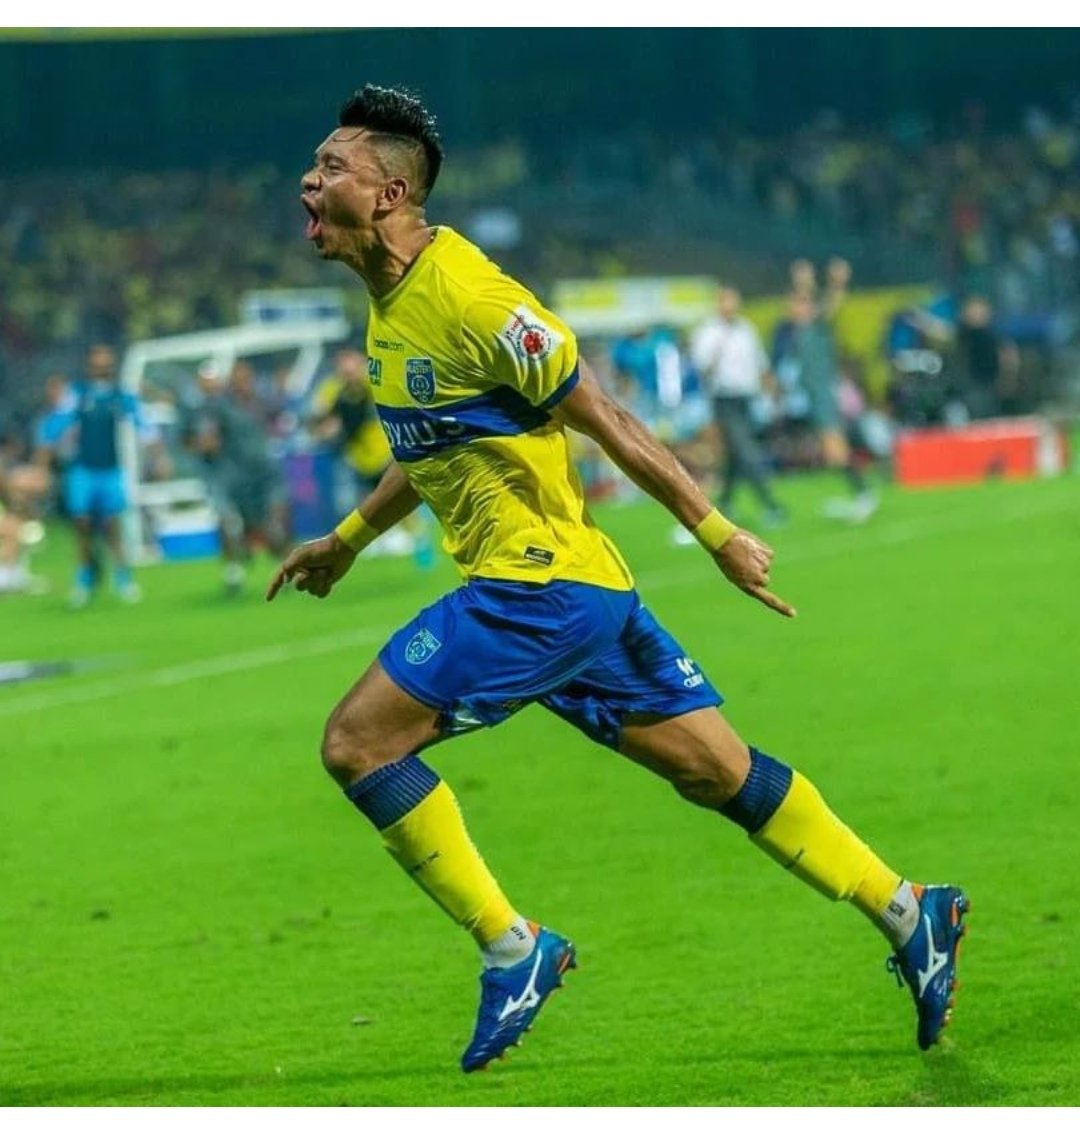 This is Sandeep Singh Appreciation Post 💛💛 Coach not giving him enough time. Last season when he's doing great he got a unfortunate injury that ruined his season. But this man built different 💛💛 Best offensive right back in 🇮🇳 (My opinion) Still needs some improvement.